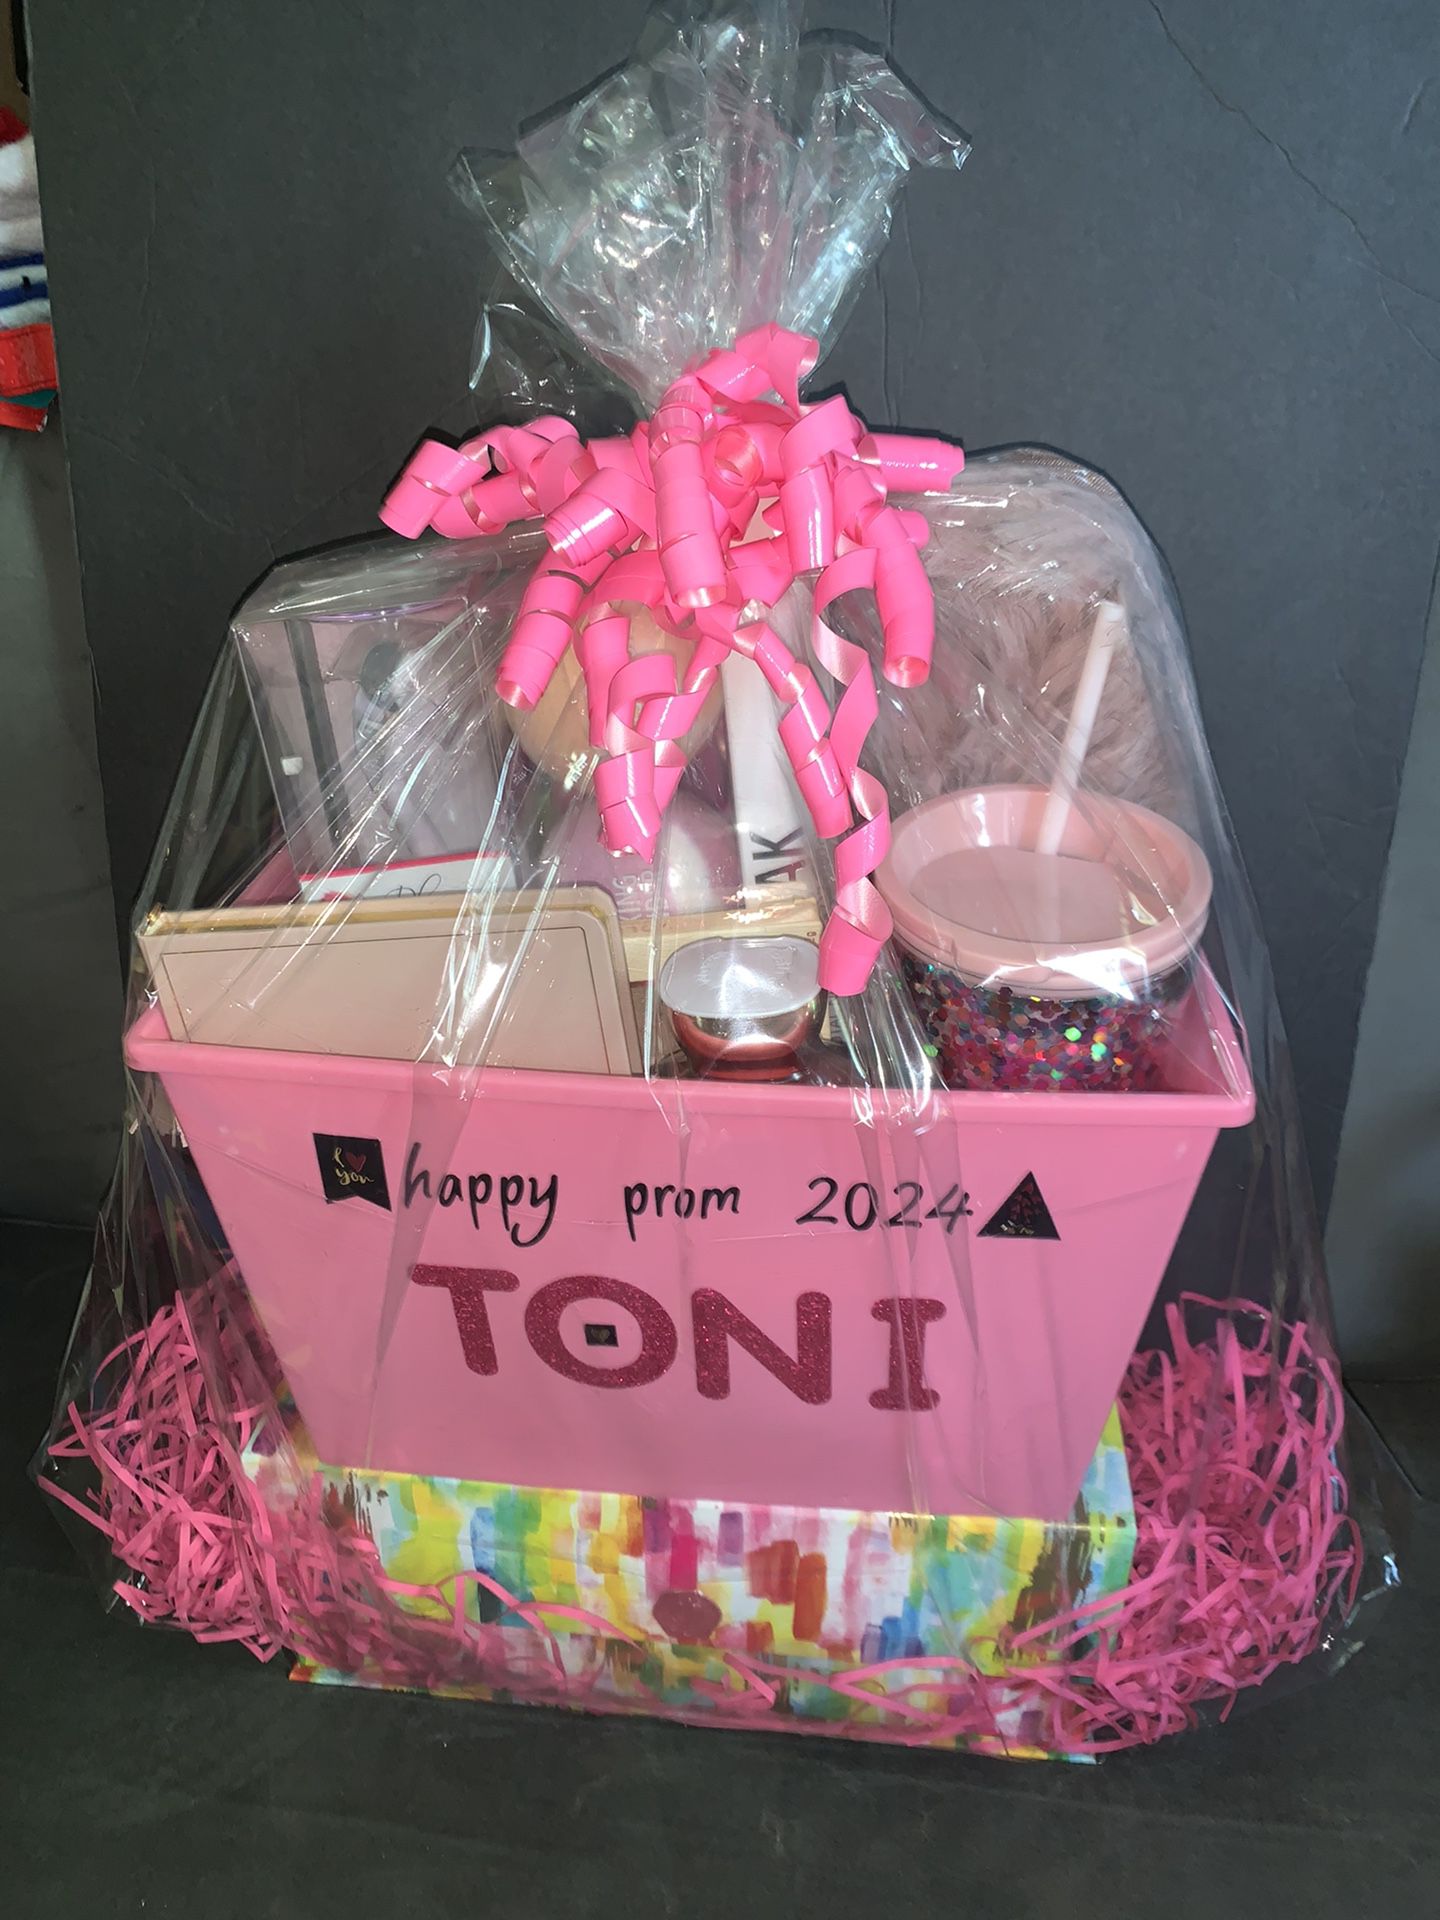 Custom Gift Baskets / Sets- PERFECT FOR MOTHERS DAY TEACHER APPRECIATION PROM GRADUATION etc